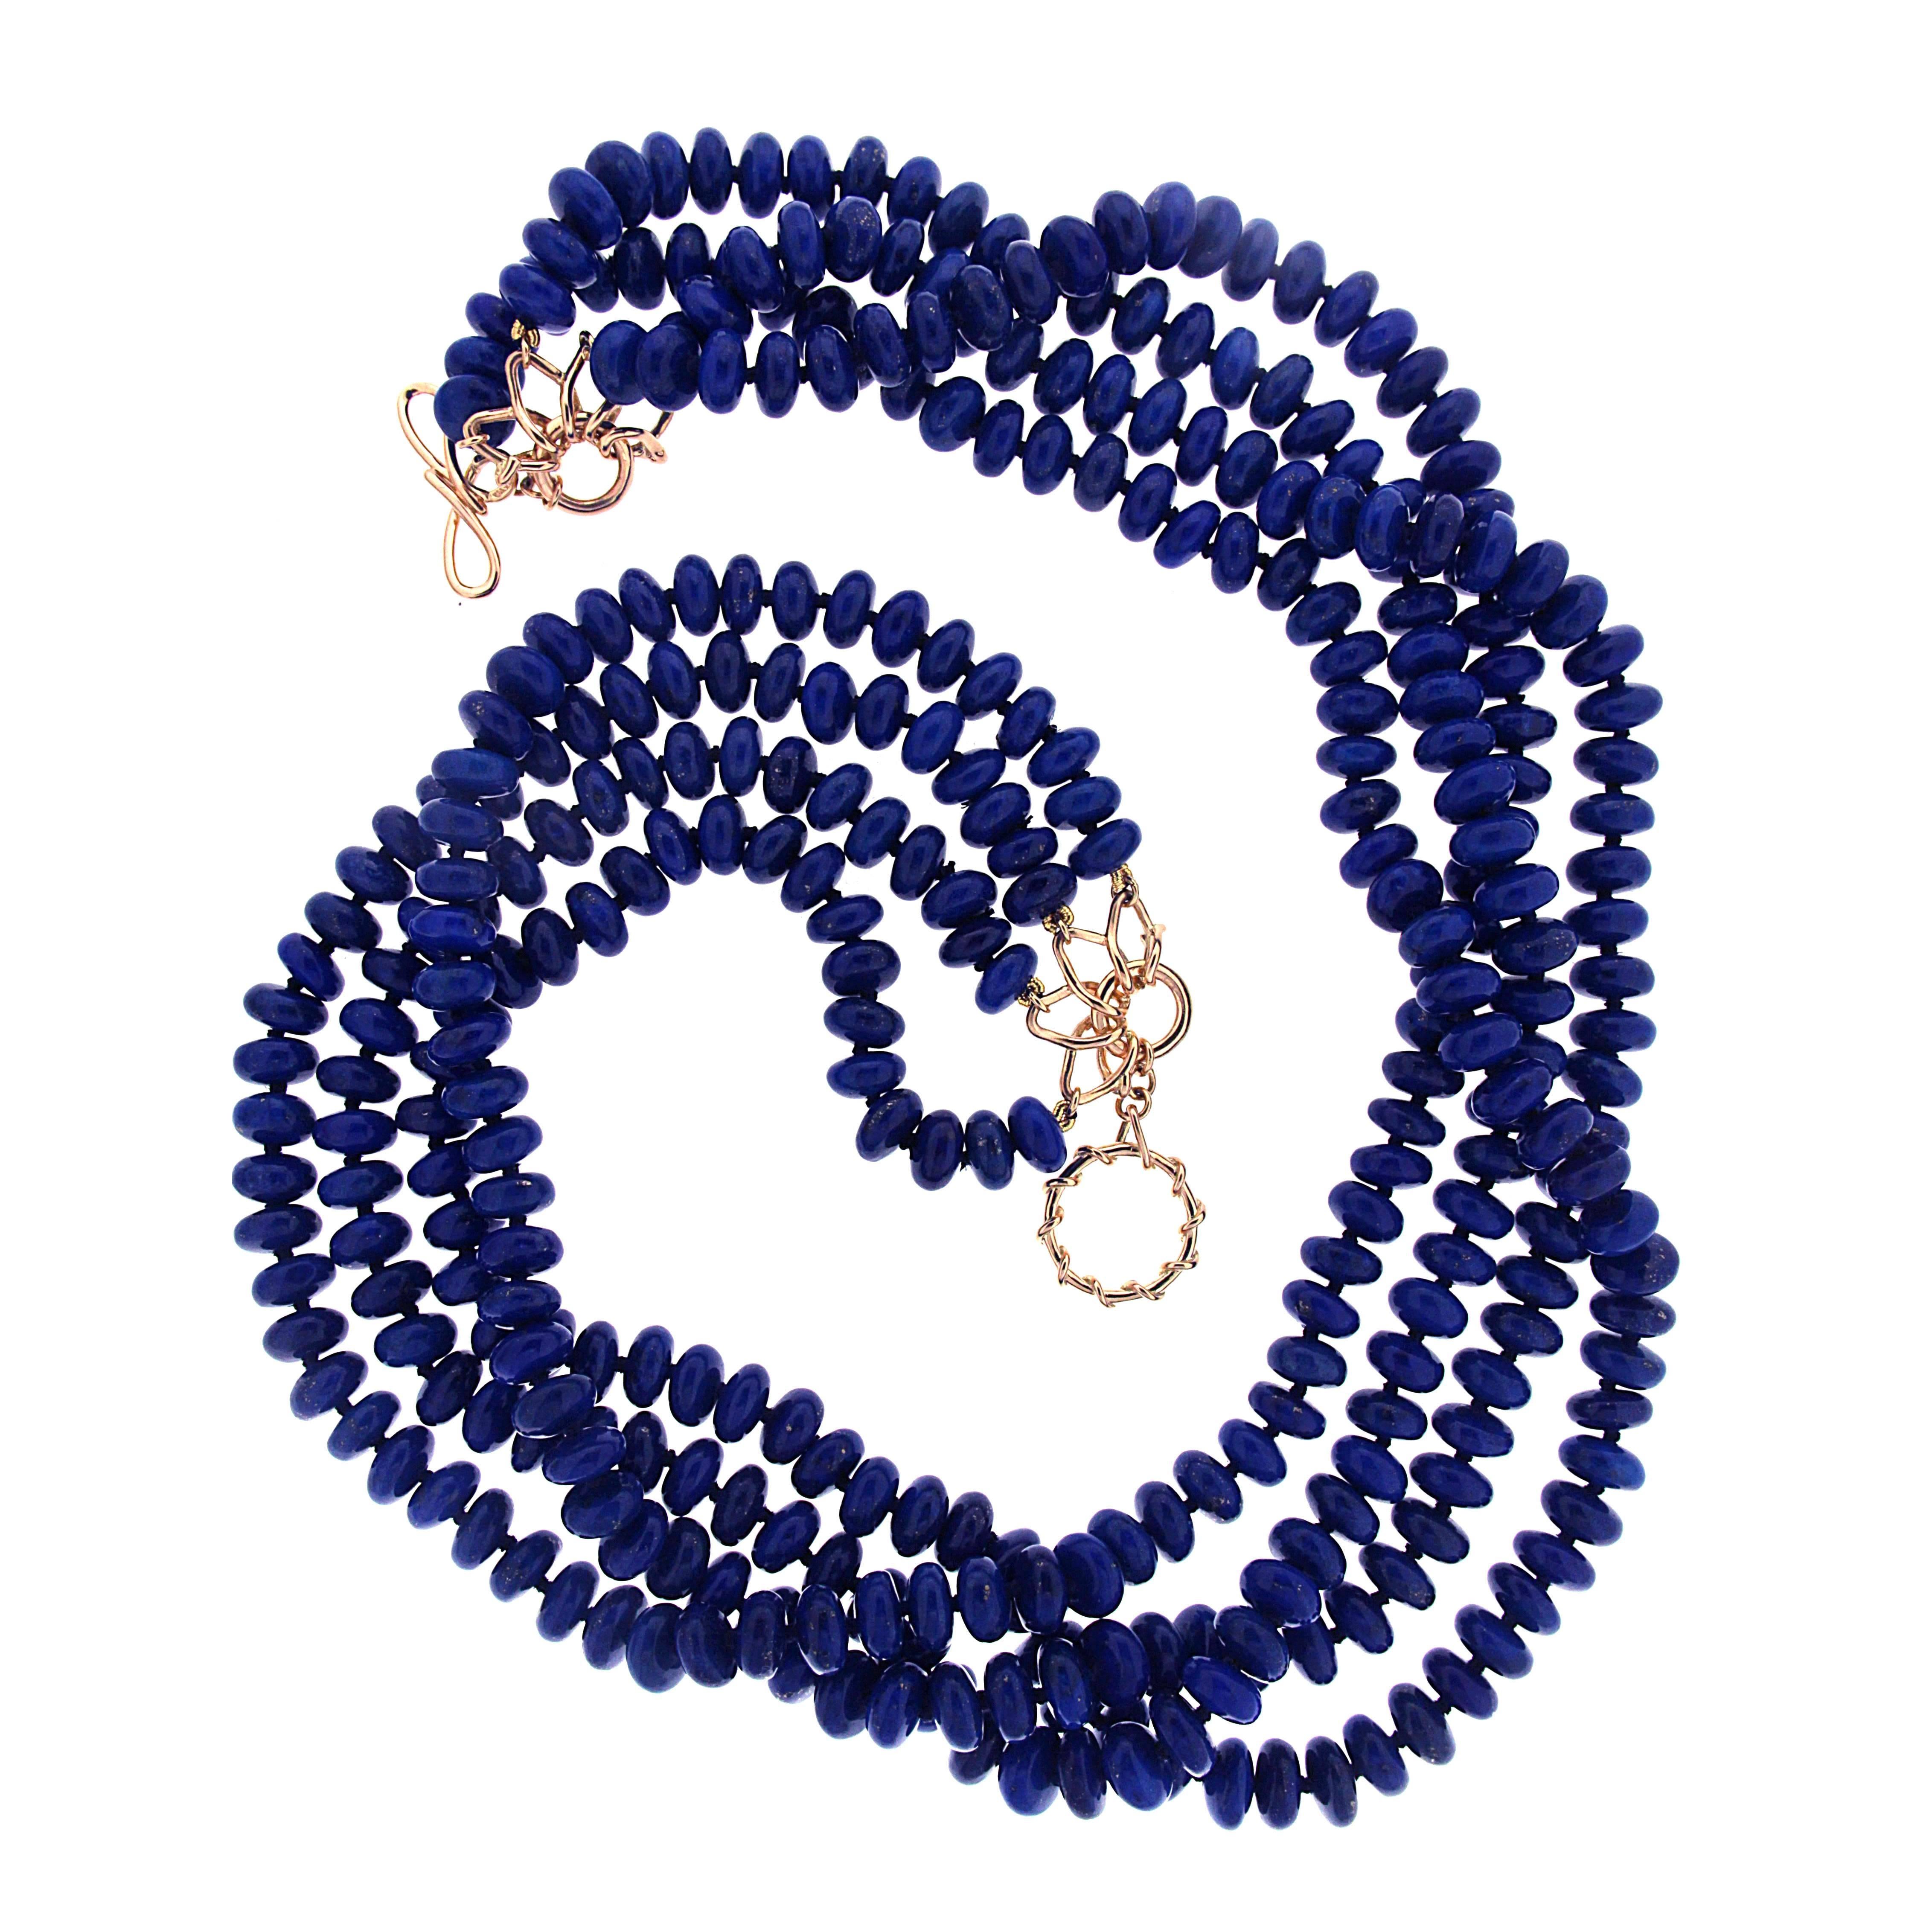 This necklace features 4 strands of 8.2mm round lapis lazuli roundels. It is finished with 18kt yellow gold knot and toggle clasp.